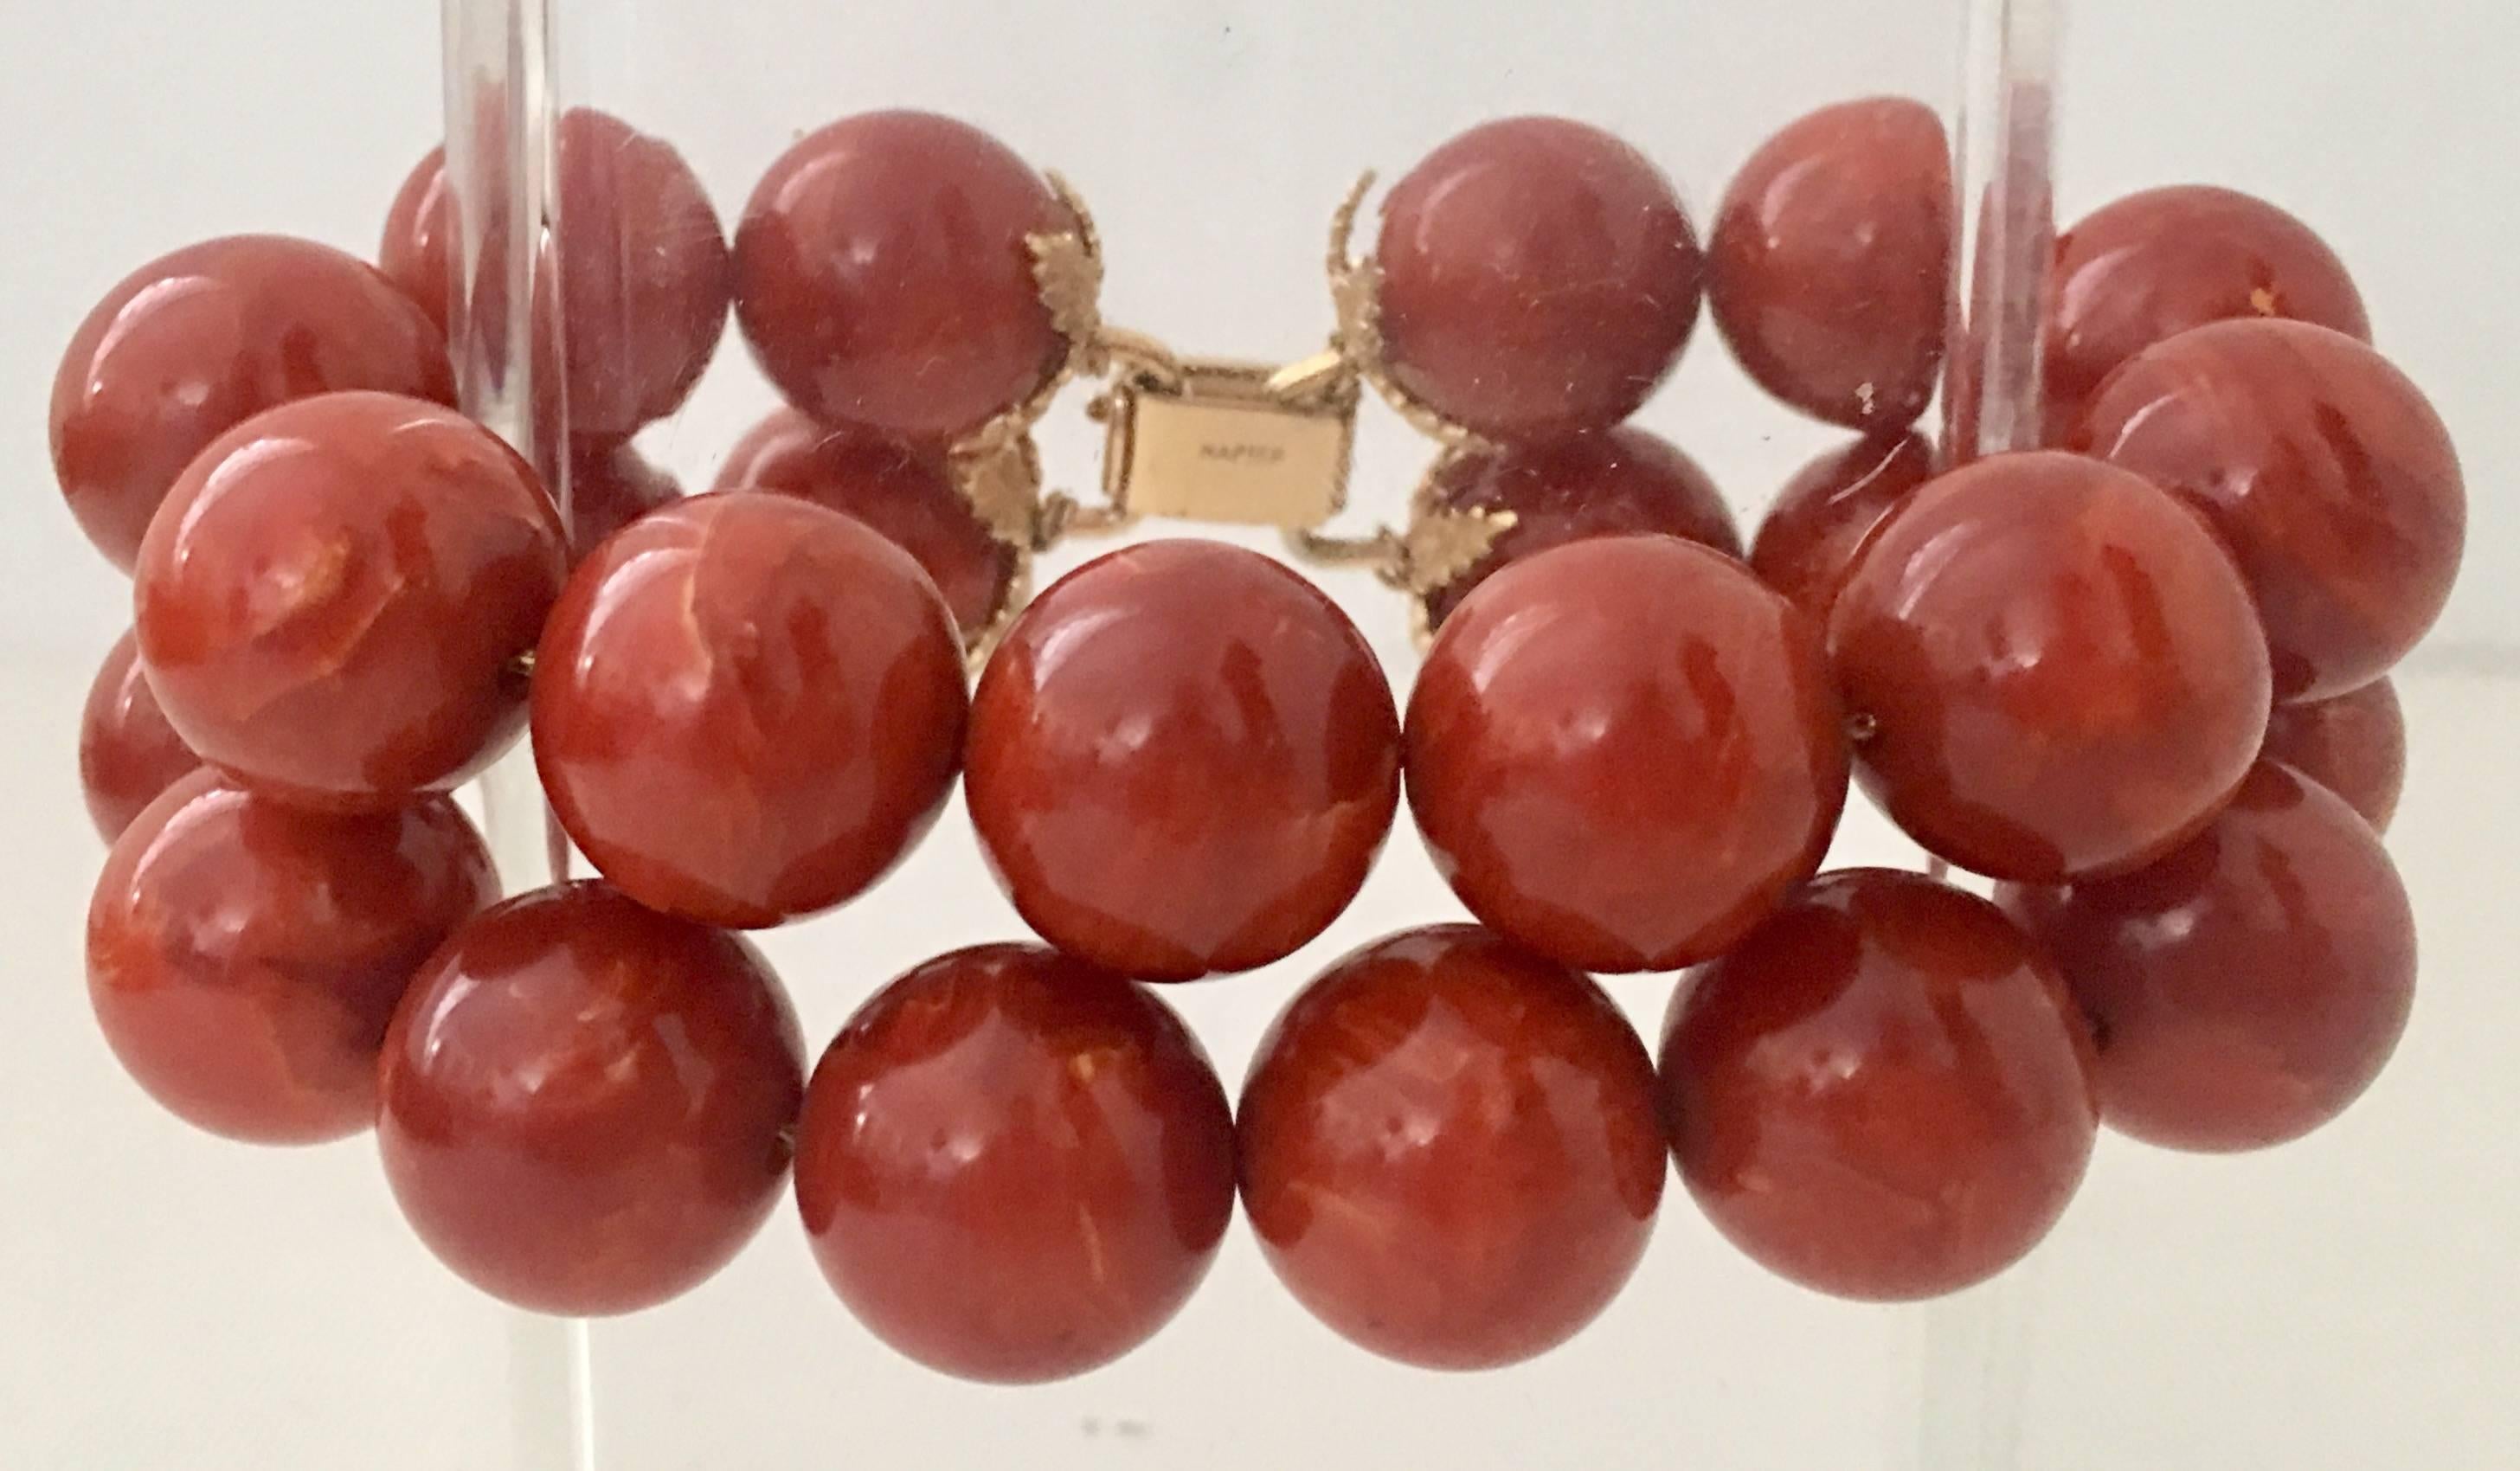 Vintage Cinnamon Bakelite Double Row Bead Bracelet By, Napier. Features a gold plate organic leaf detail and classic box clasp. The clasp is signed, Napier.
Beads are approximately .50